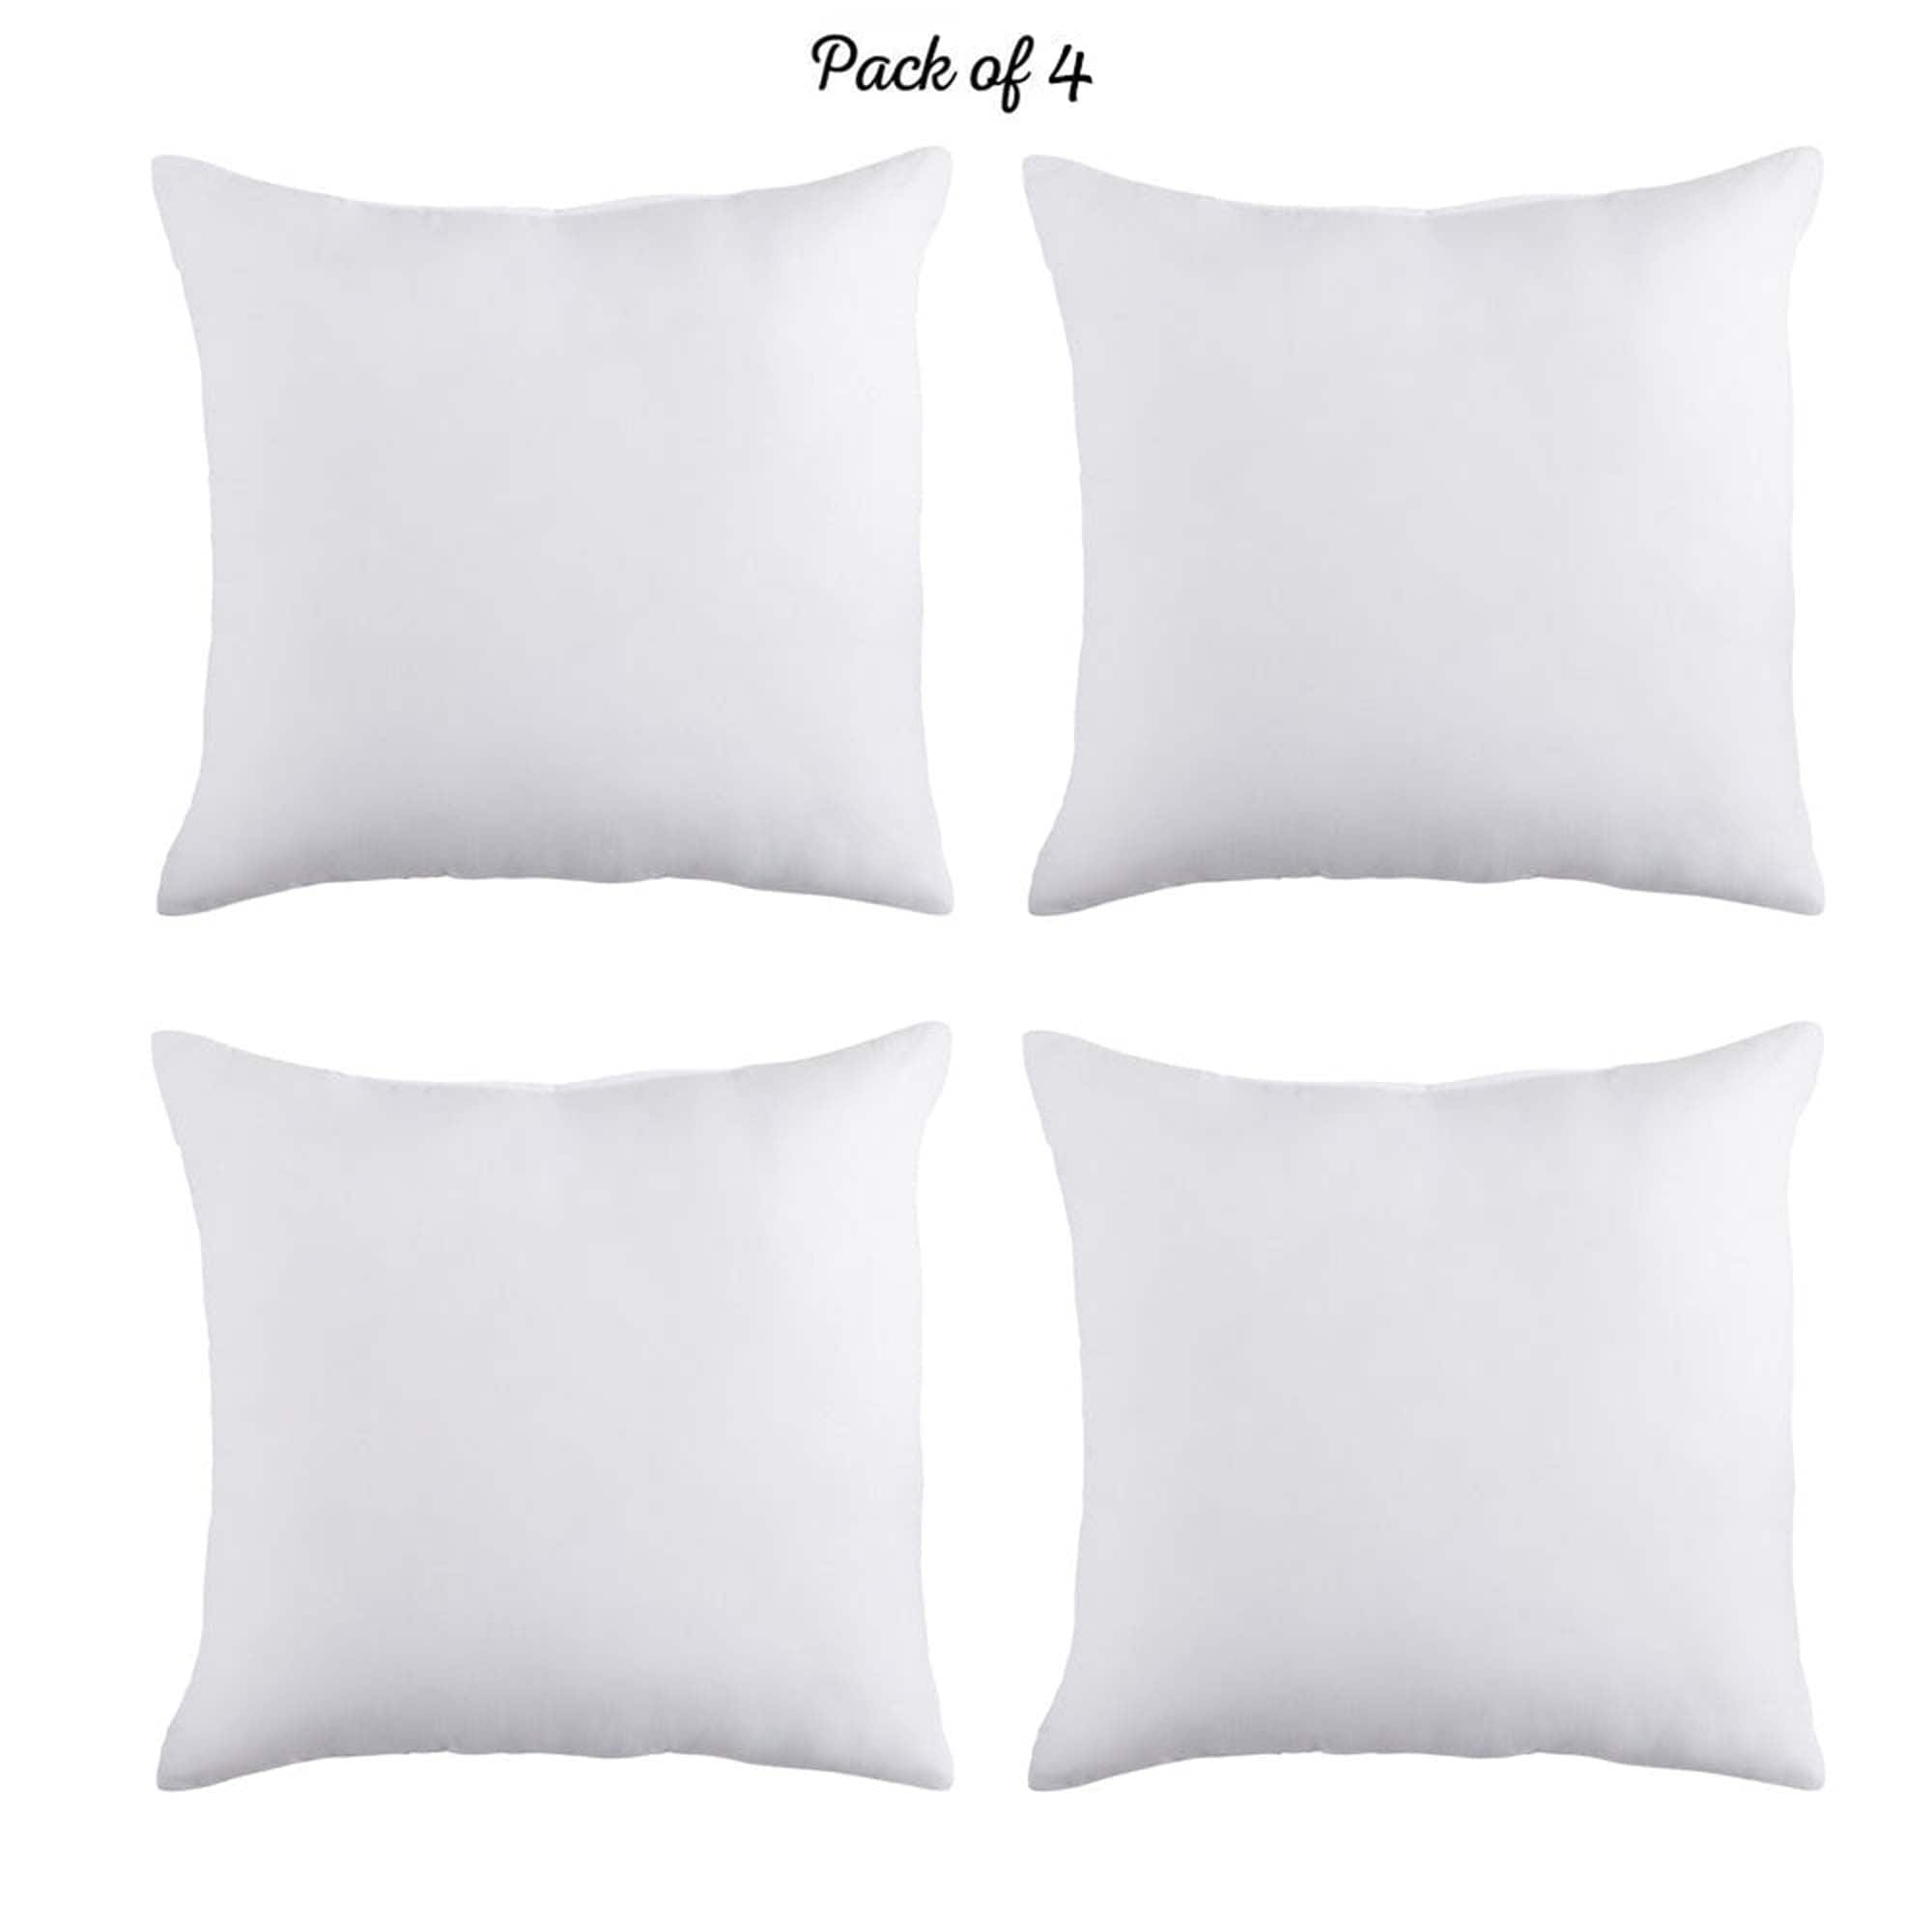 https://ak1.ostkcdn.com/images/products/is/images/direct/33acad41f75a9ad000883e05409ecb4ce81013da/Eco-Friendly-Set-of-4-Throw-Pillow-Insert-with-Recycled-Poly-Filling.jpg